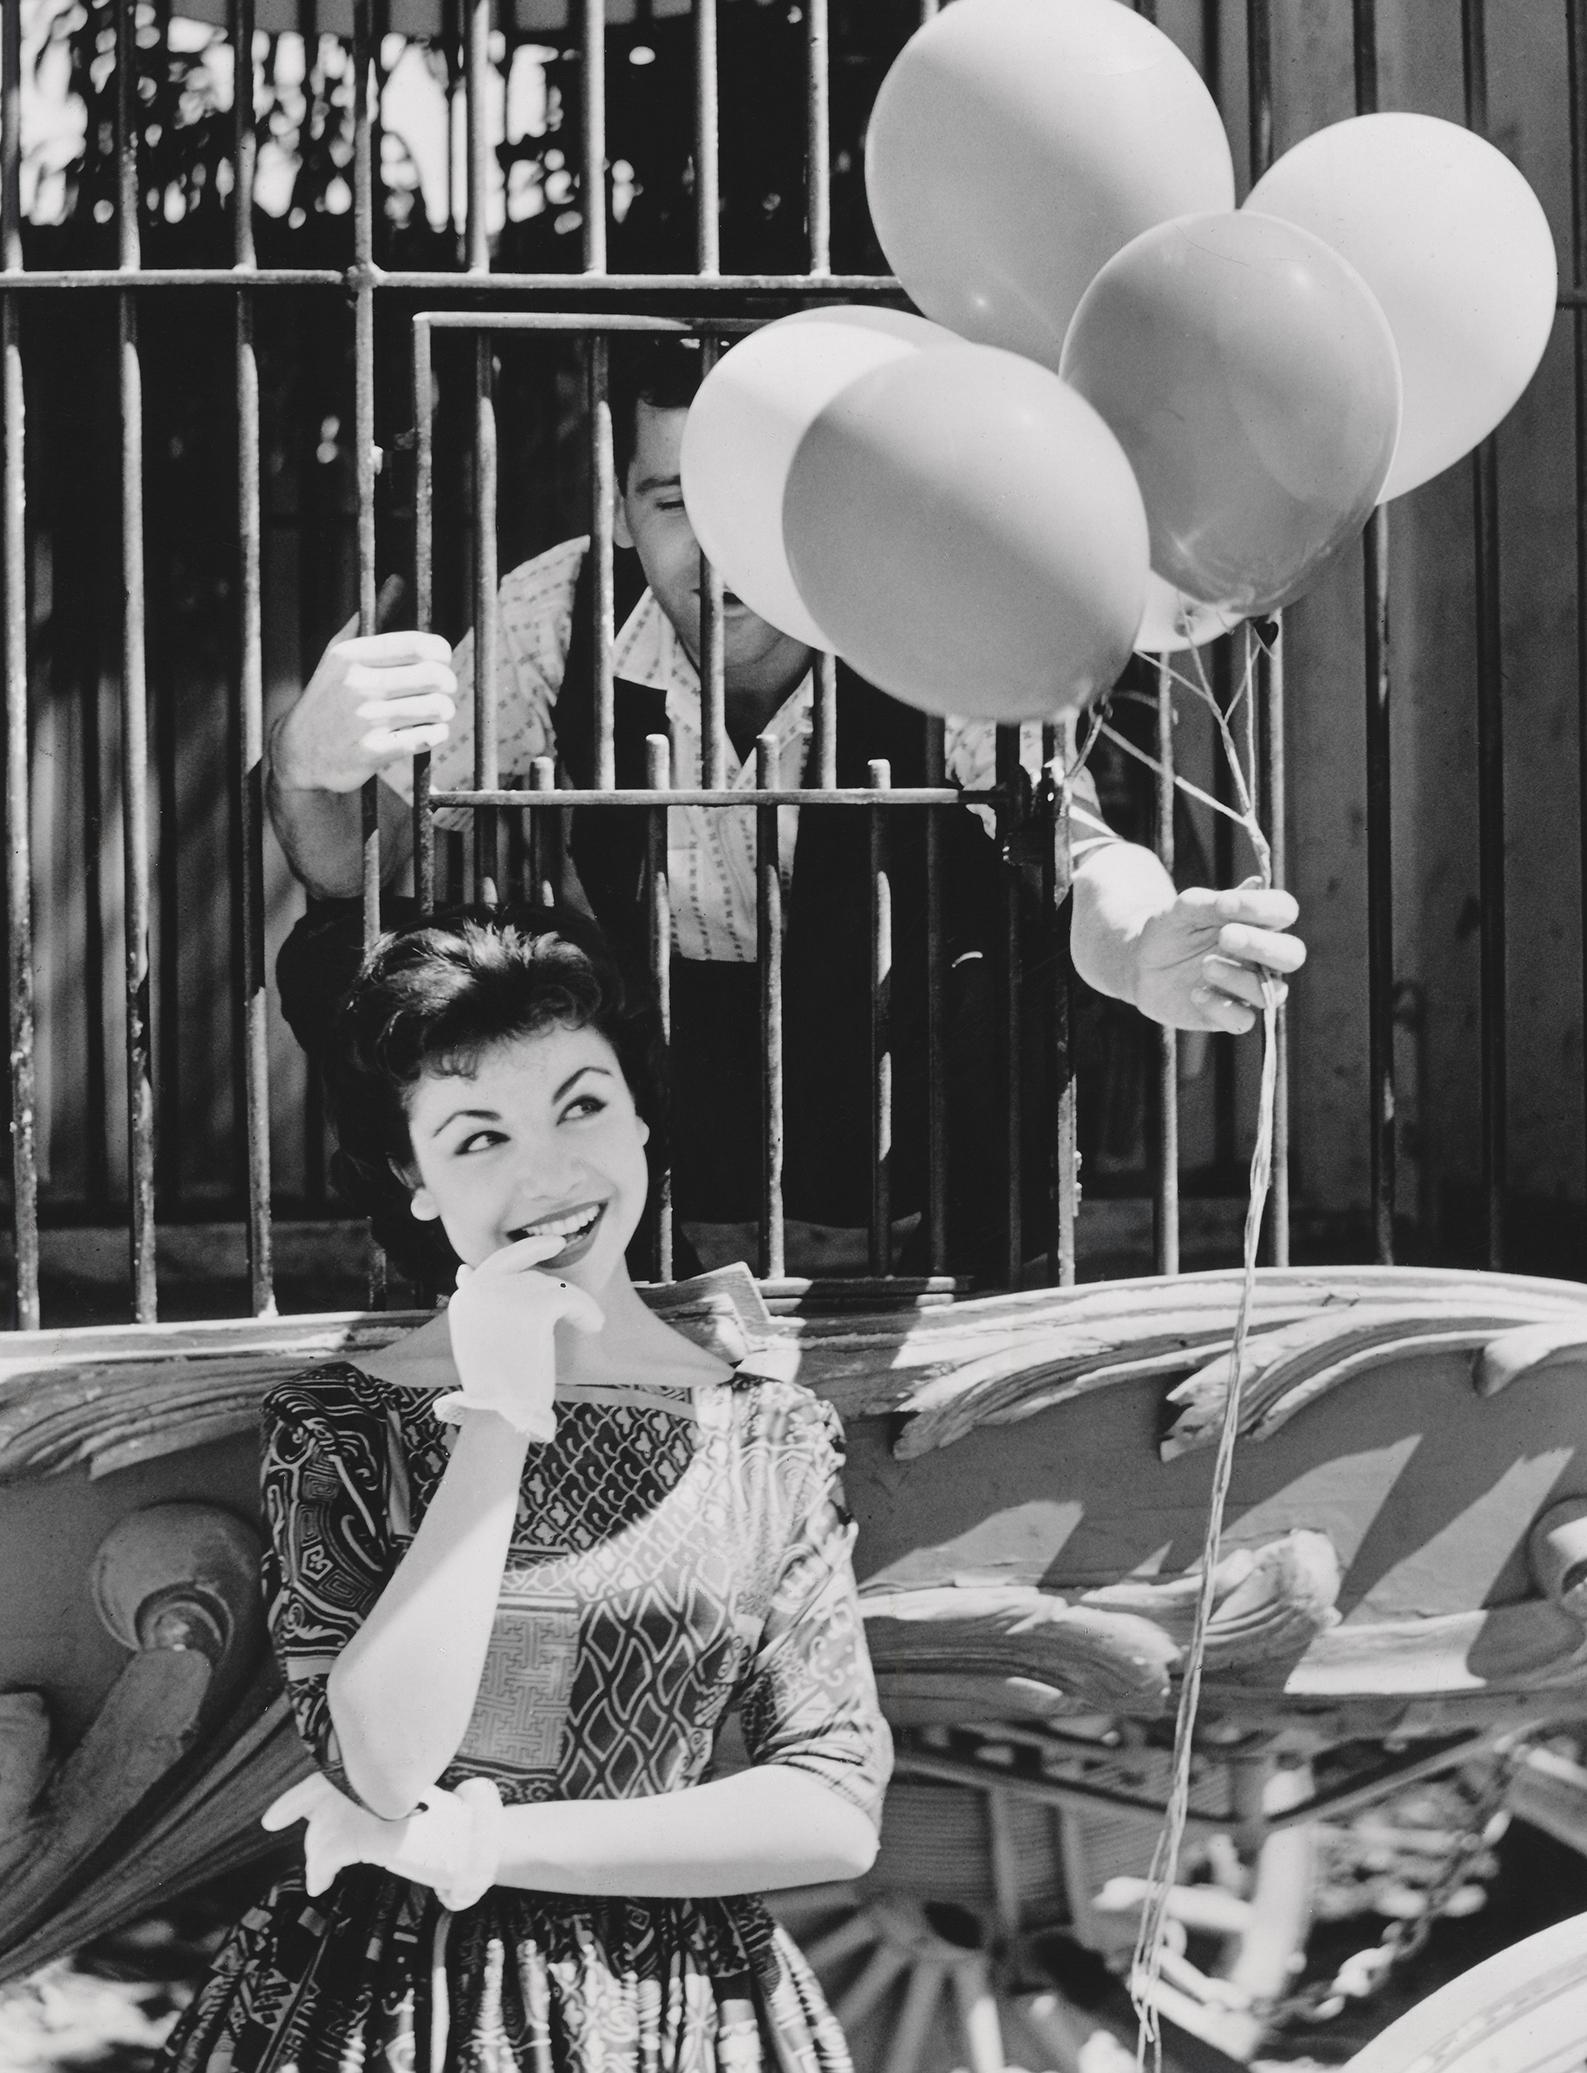 Unknown Portrait Photograph - Anette Funicello: Mouseketeer at the Carnival